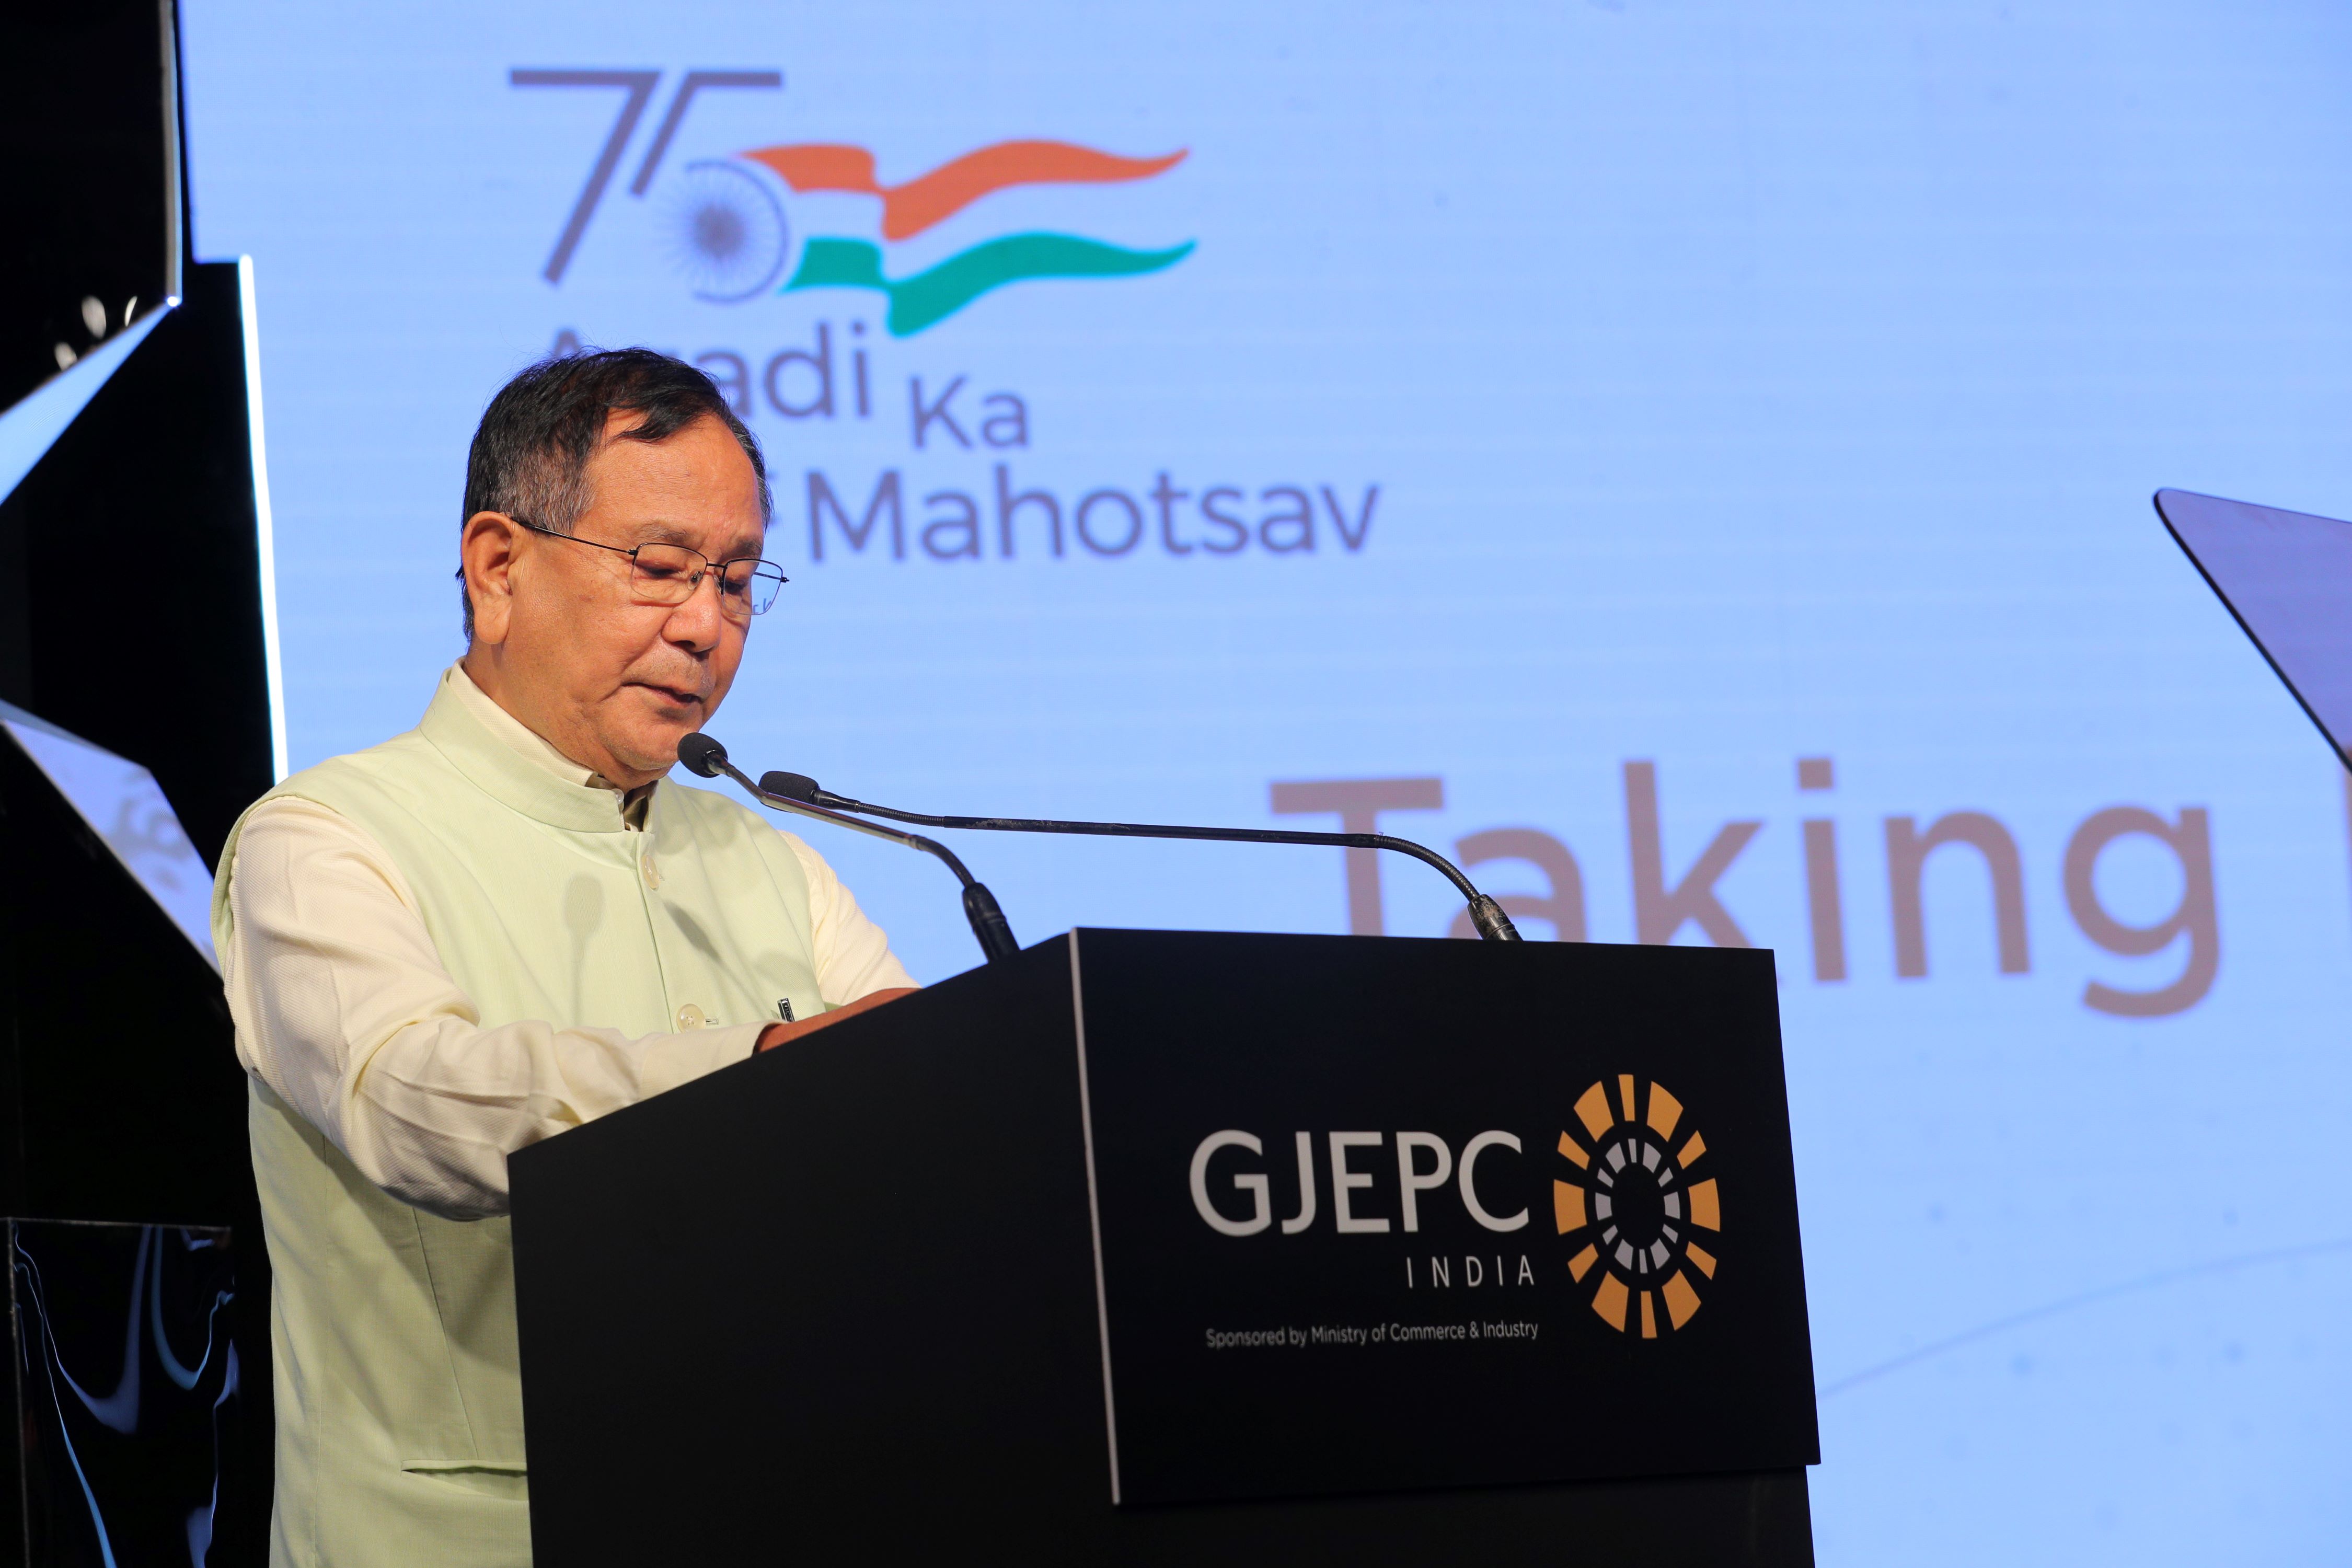 gjepc-organizes-india-evening-to-showcase-finest-of-indian-jewels-to-ambassadors-of-the-leading-countries-of-the-world